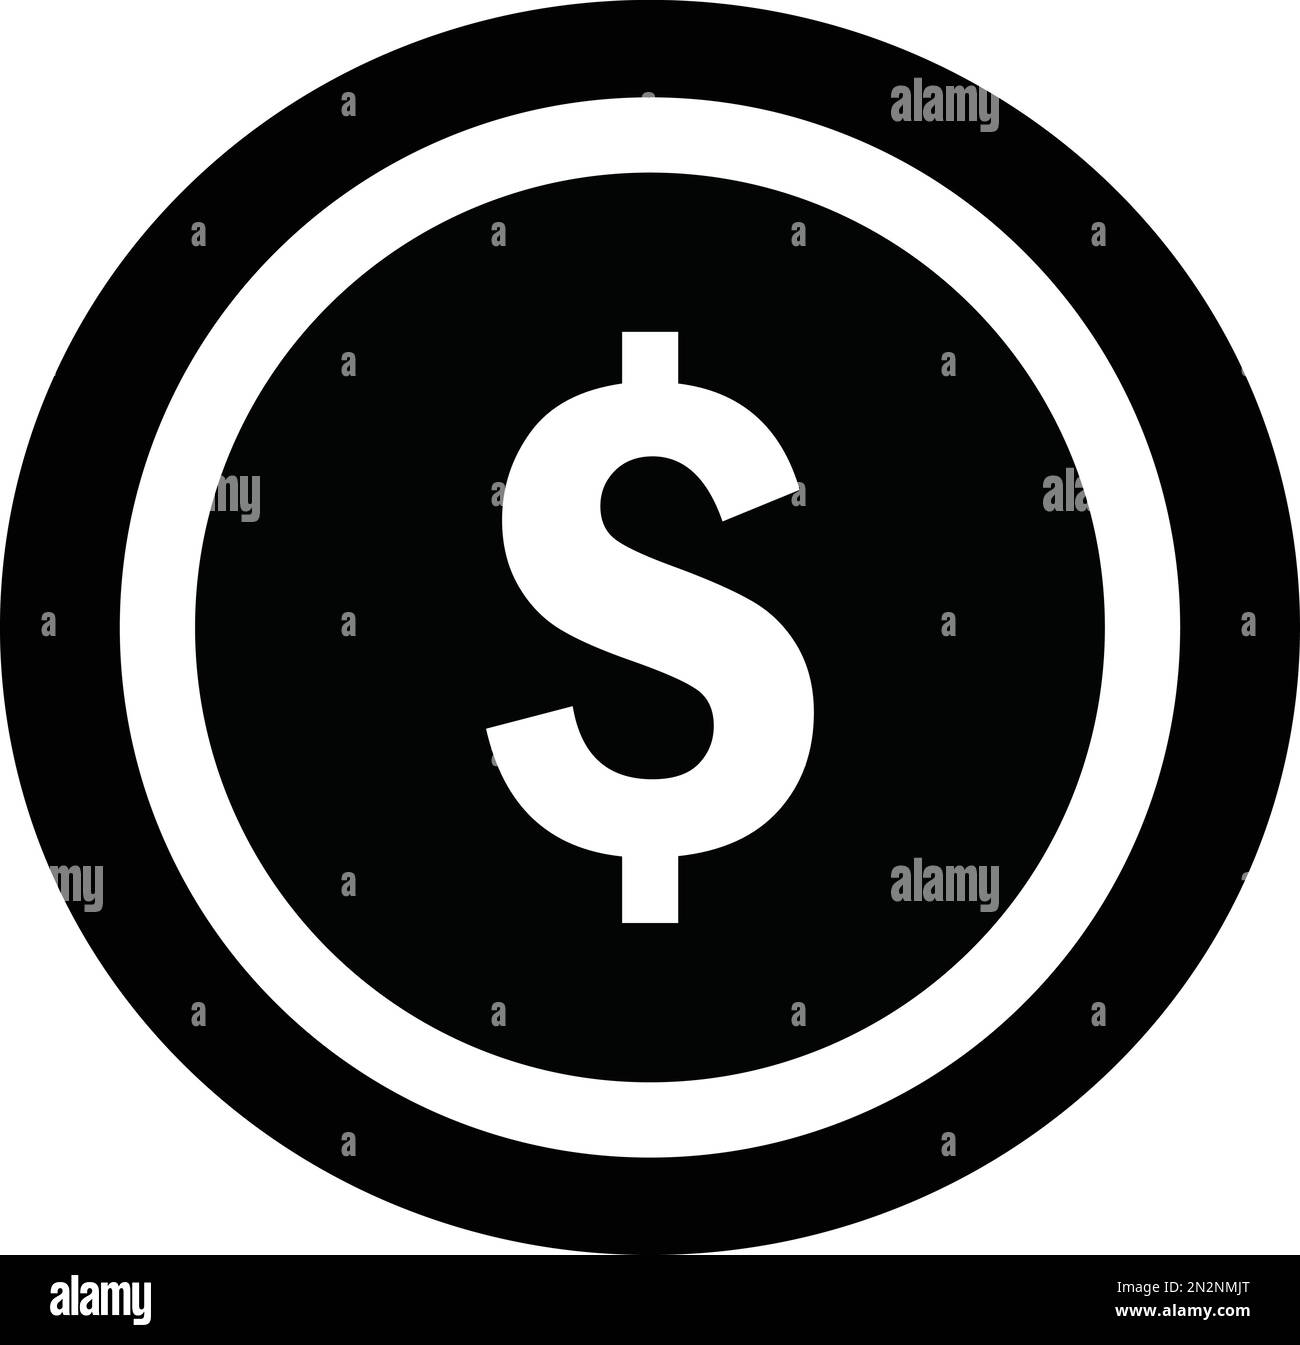 Simple Dollar coin in black. Finance and business icon. Money sign Stock Vector